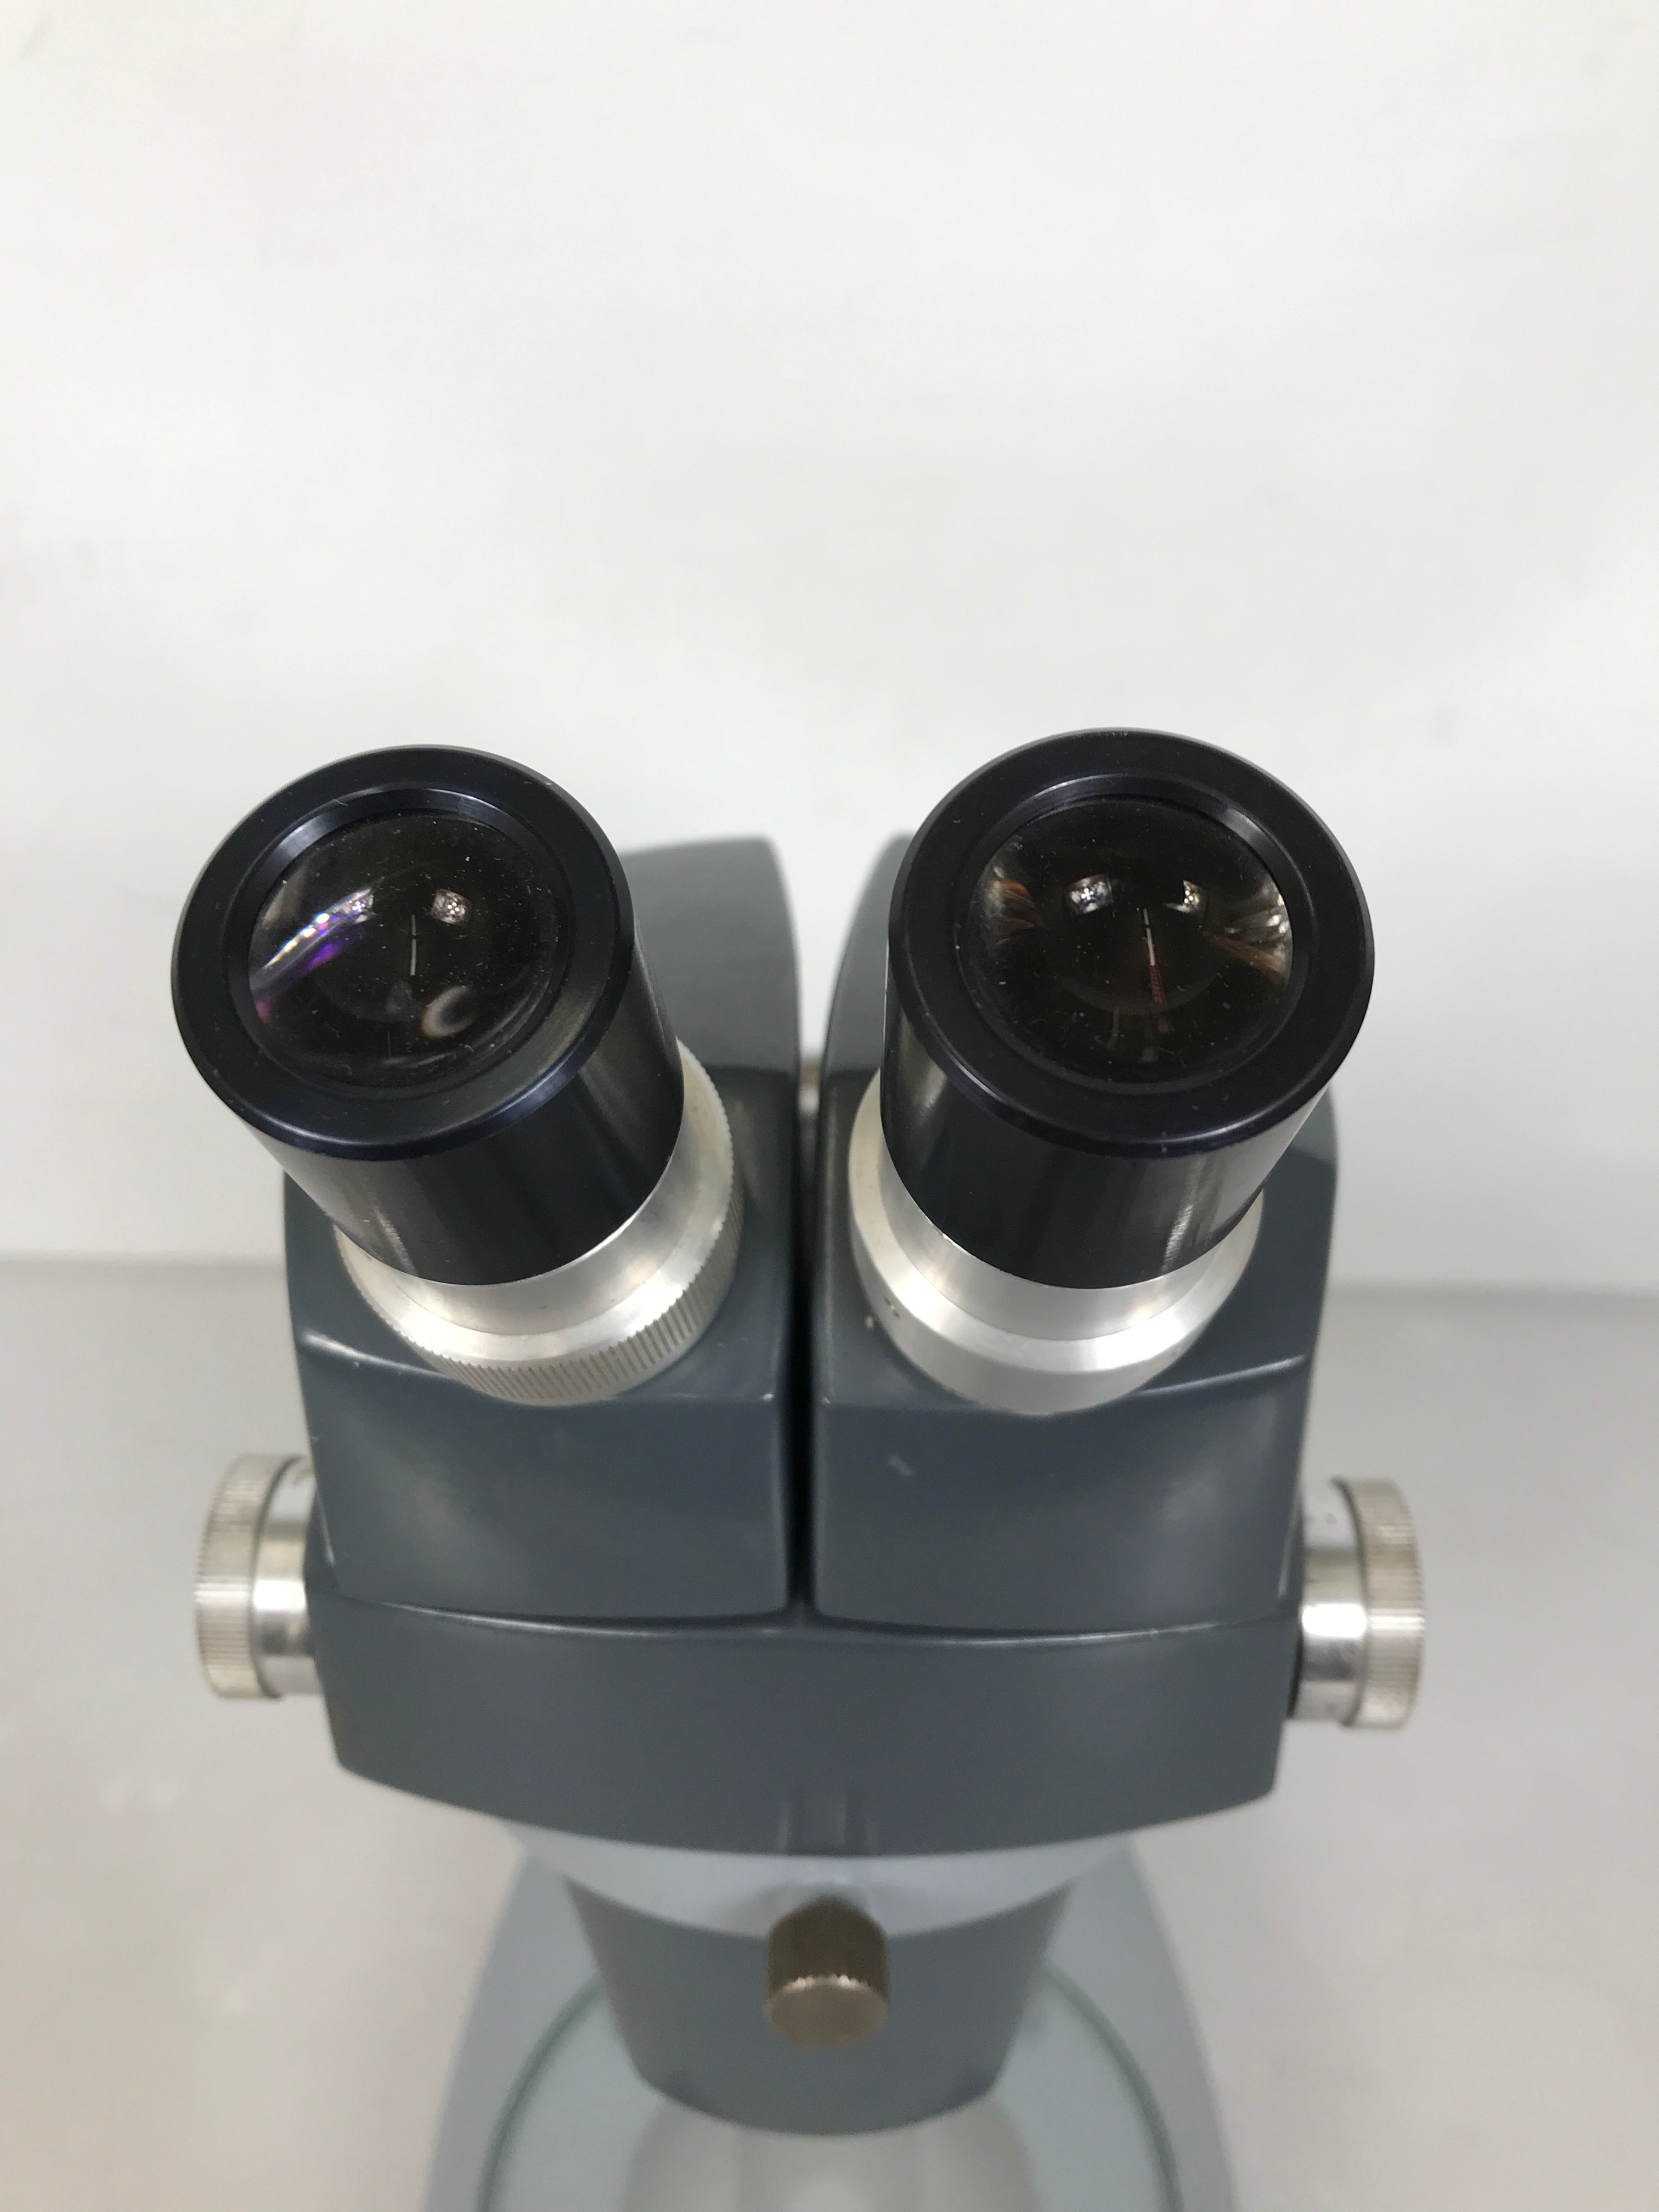 American Optical AO 569 Stereo Star Zoom Microscope 0.7x-3.0x with 10x W.F.  Eyepieces